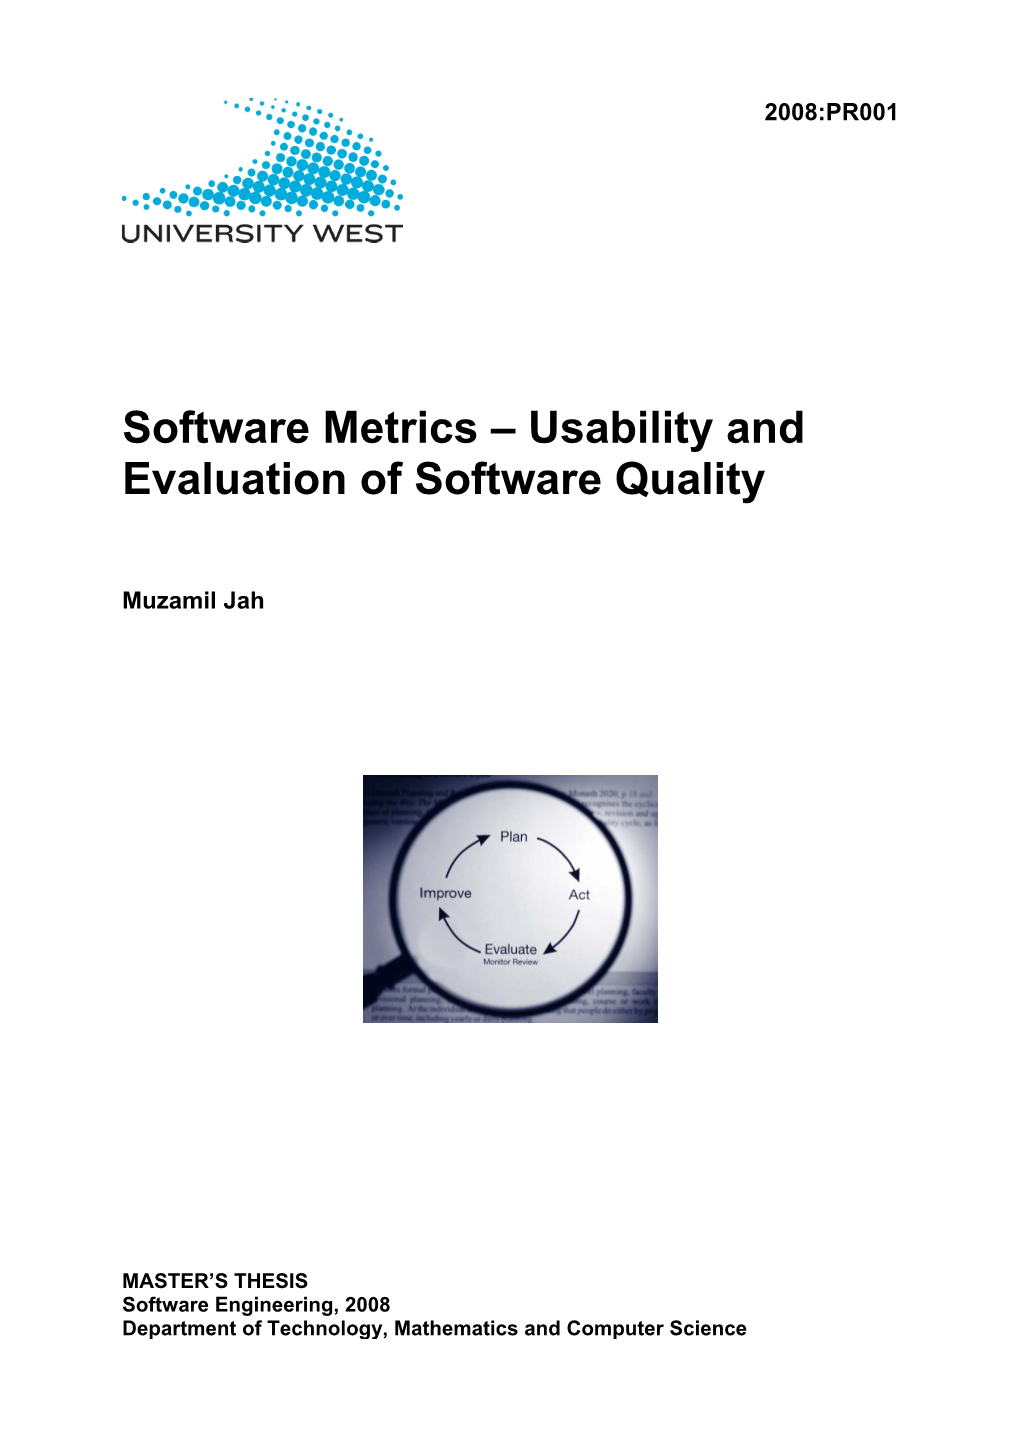 Software Metrics – Usability and Evaluation of Software Quality